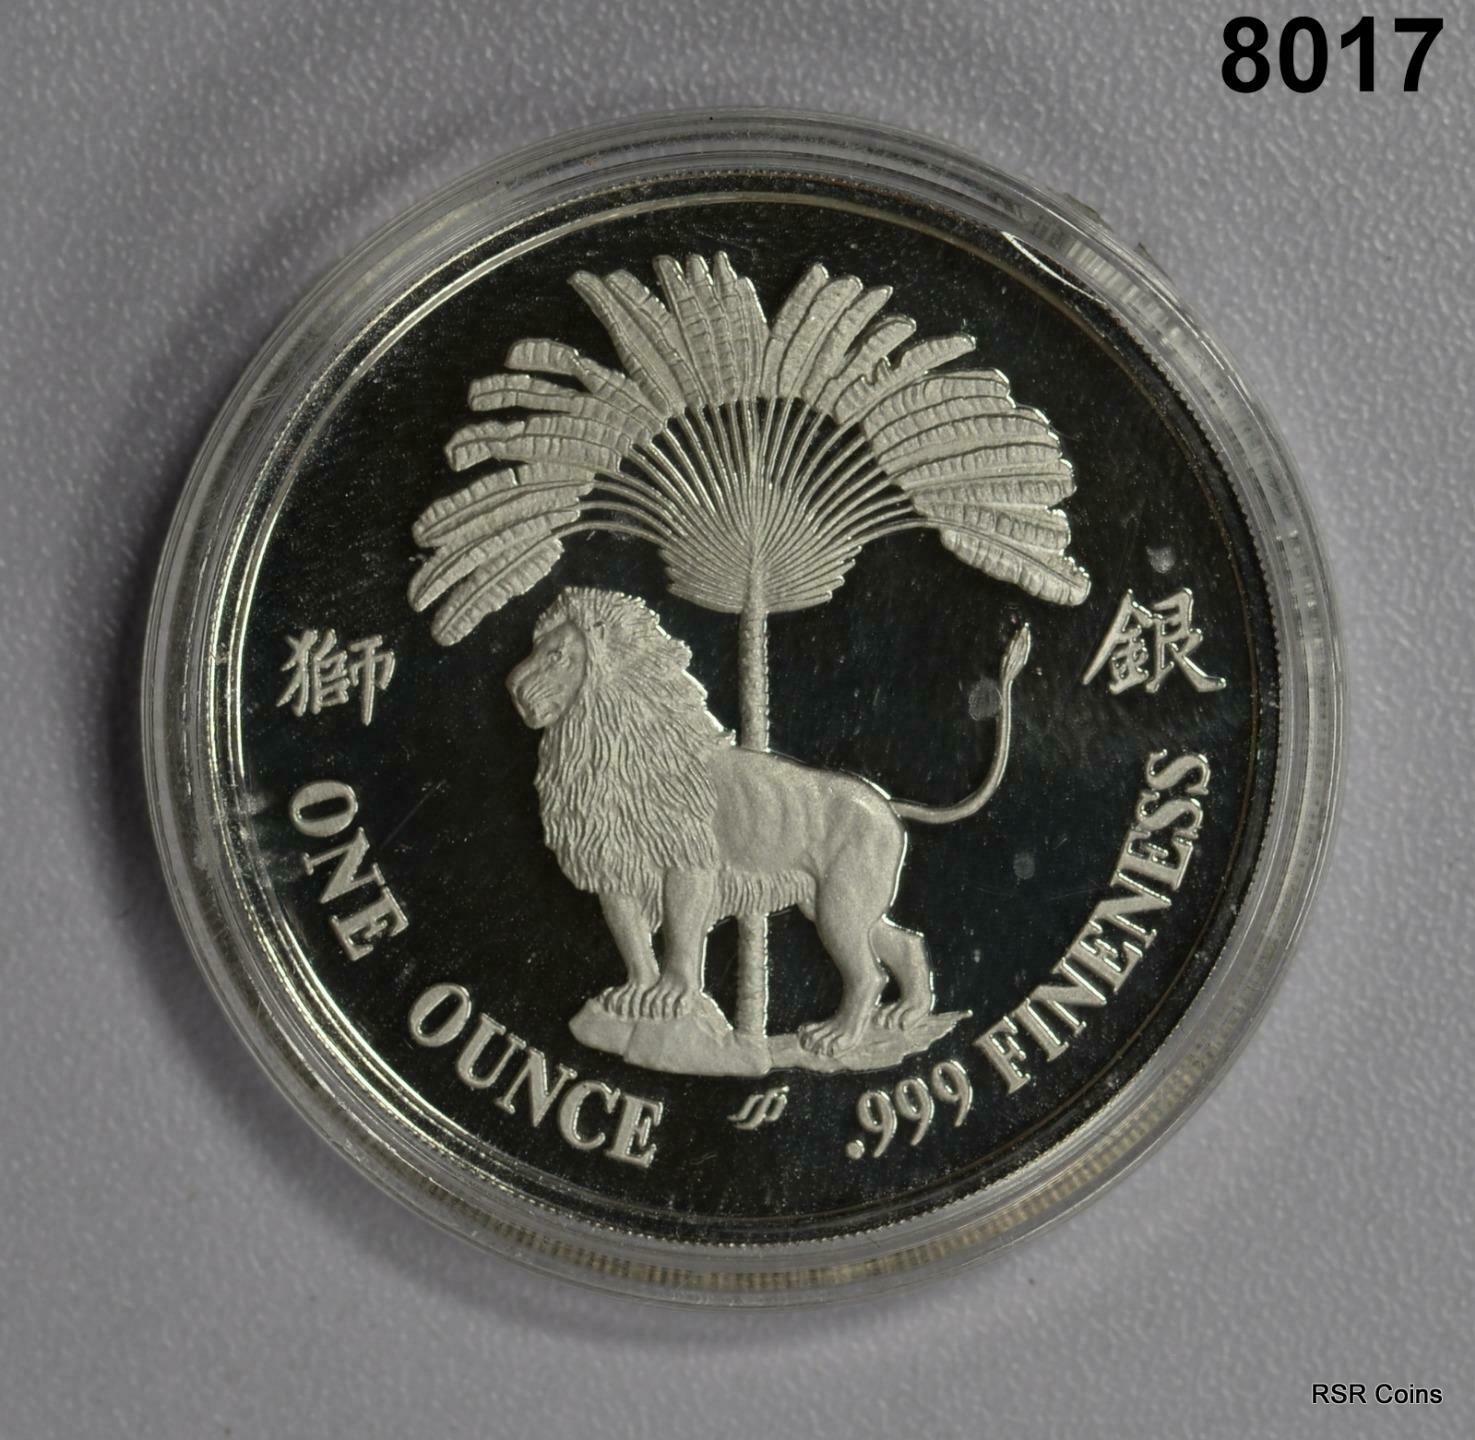 SINGAPORE 1986 OUNCE .999 SILVER HALLEY'S COMET LION PALM TREE IN CAPSULE! #8017